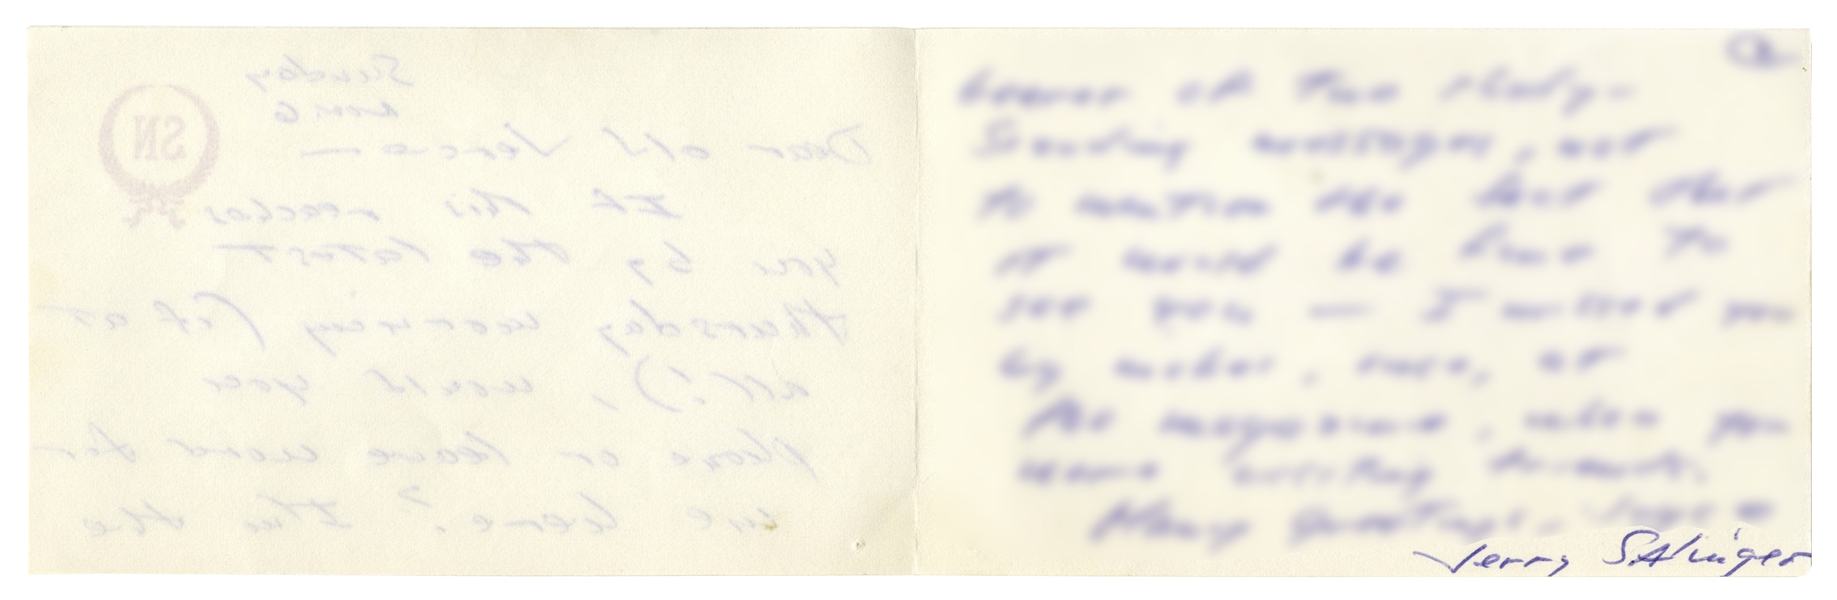 J.D. Salinger Autograph Letter Signed -- ''...I missed you by inches, once...''